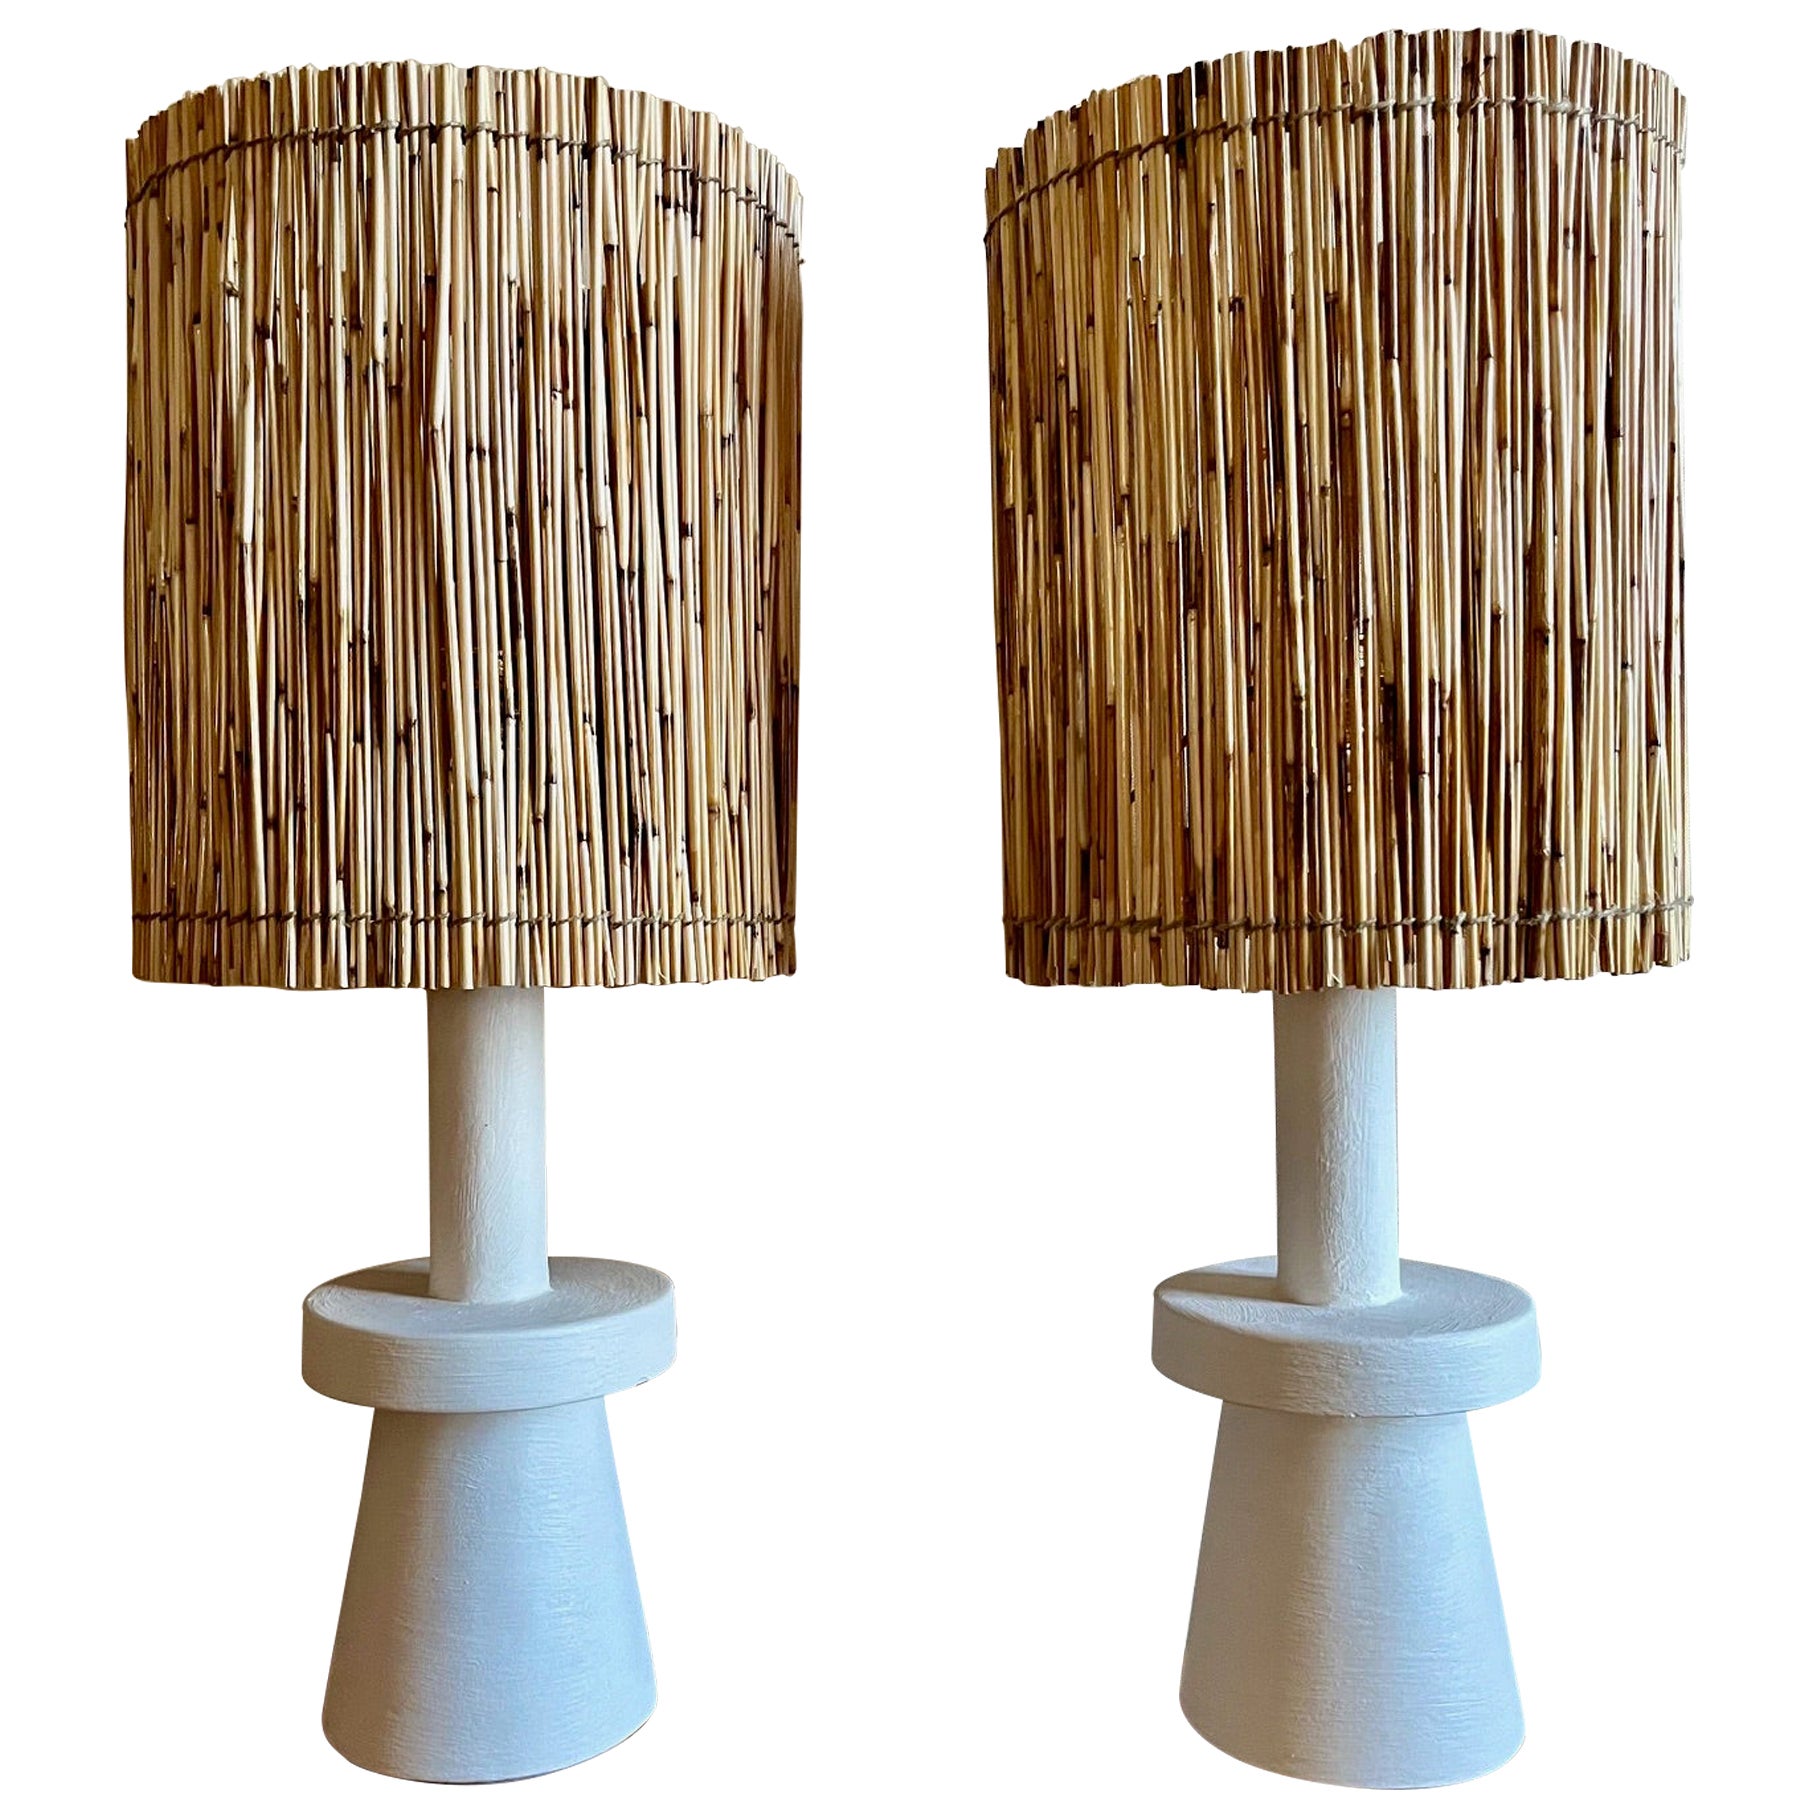 Pair of stuccoed plaster table lamps with straw shades